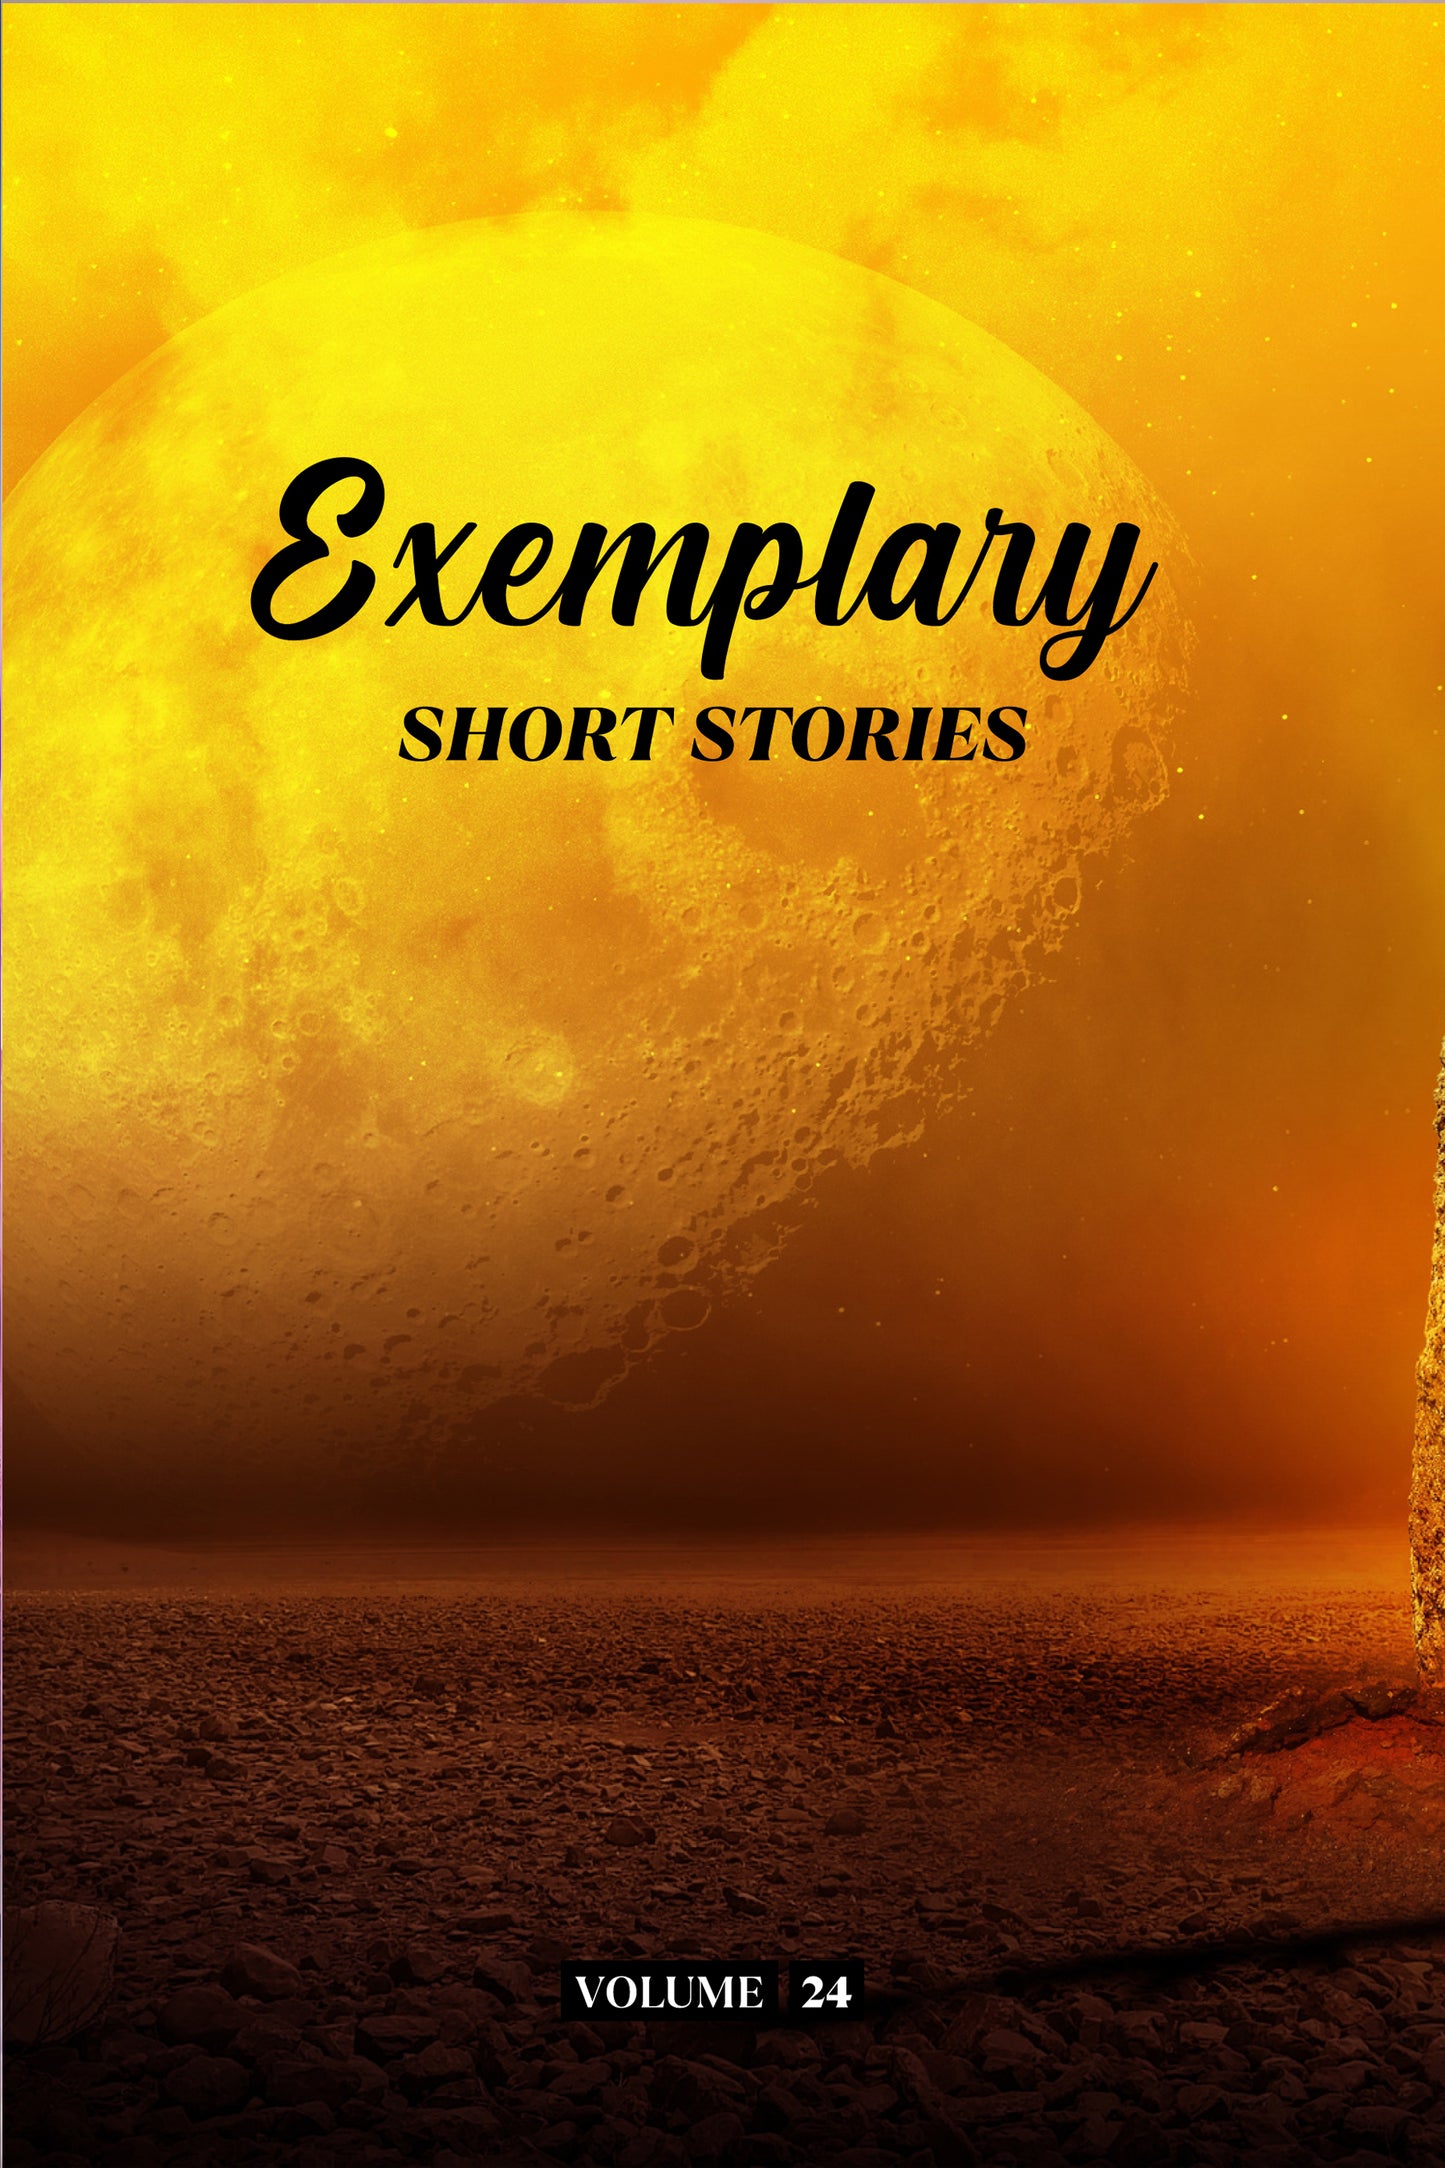 Exemplary Short Stories Volume 24 (Physical Book Pre-Order)